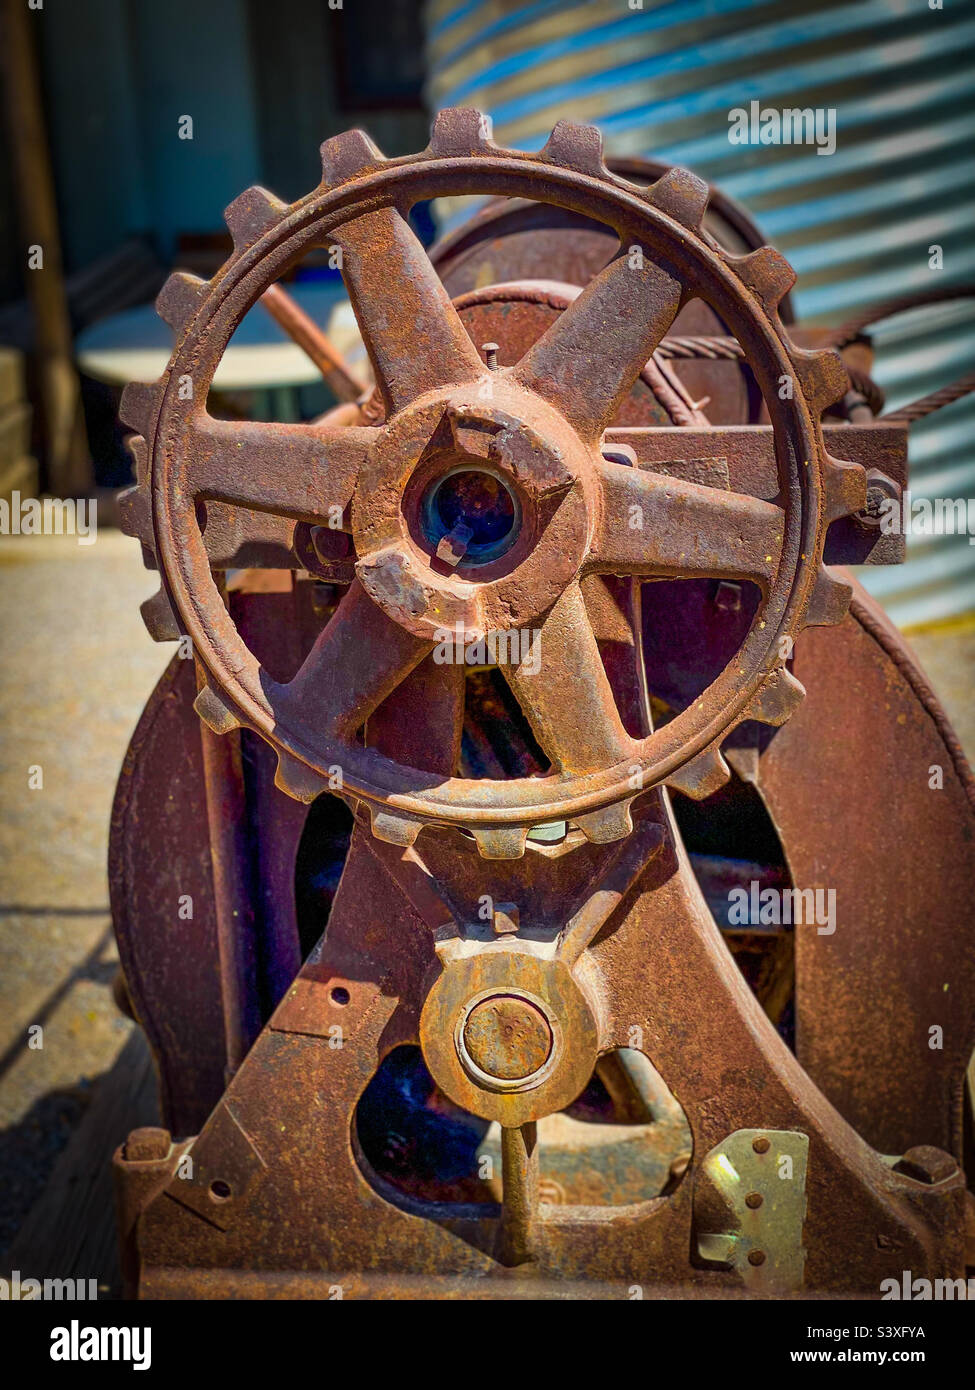 A rusty antique industrial winch. Stock Photo